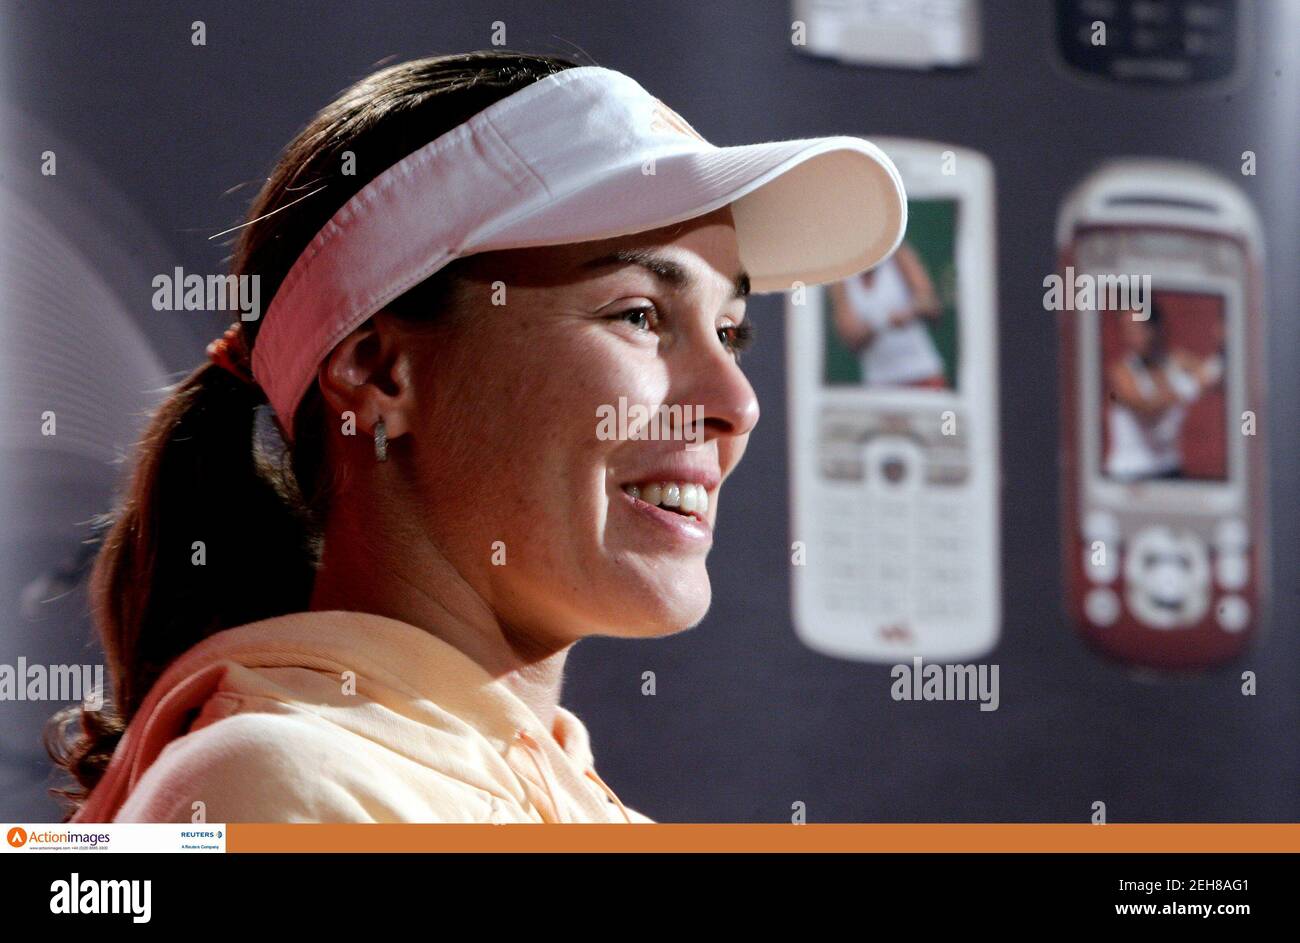 Tennis - Rogers Cup, Sony Ericsson WTA Tour - Montreal, Canada - 19/8/06  Martina Hingis of Switzerland smiles during a press conference after advancing to the finals following her match against Anna Chakvetadze of Russia   Mandatory Credit: Action Images / Chris Wattie  Livepic Stock Photo